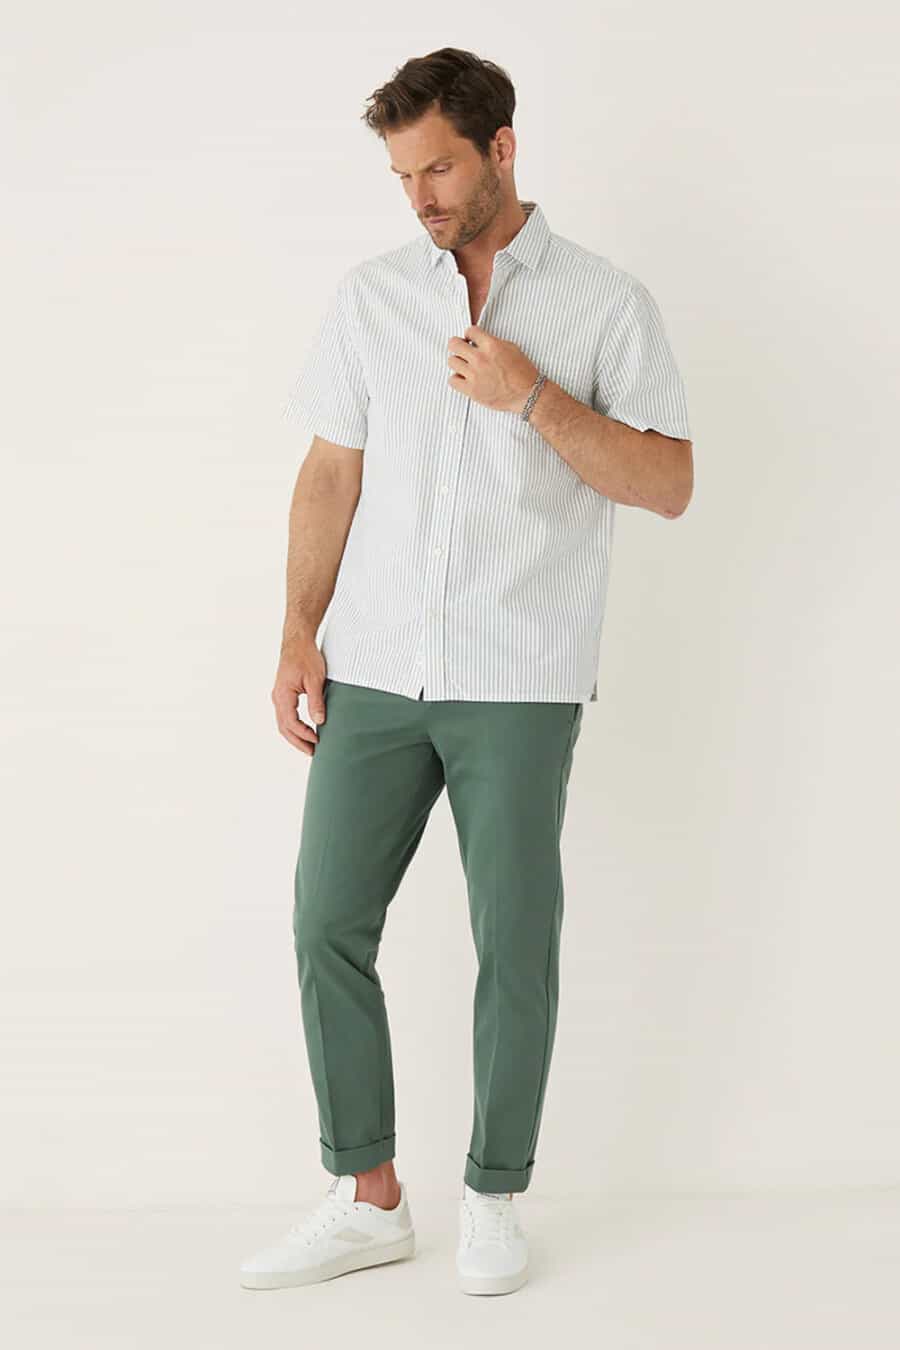 Men's cropped green turn up pants, short sleeve green/white stripe shirt and white sneakers outfit